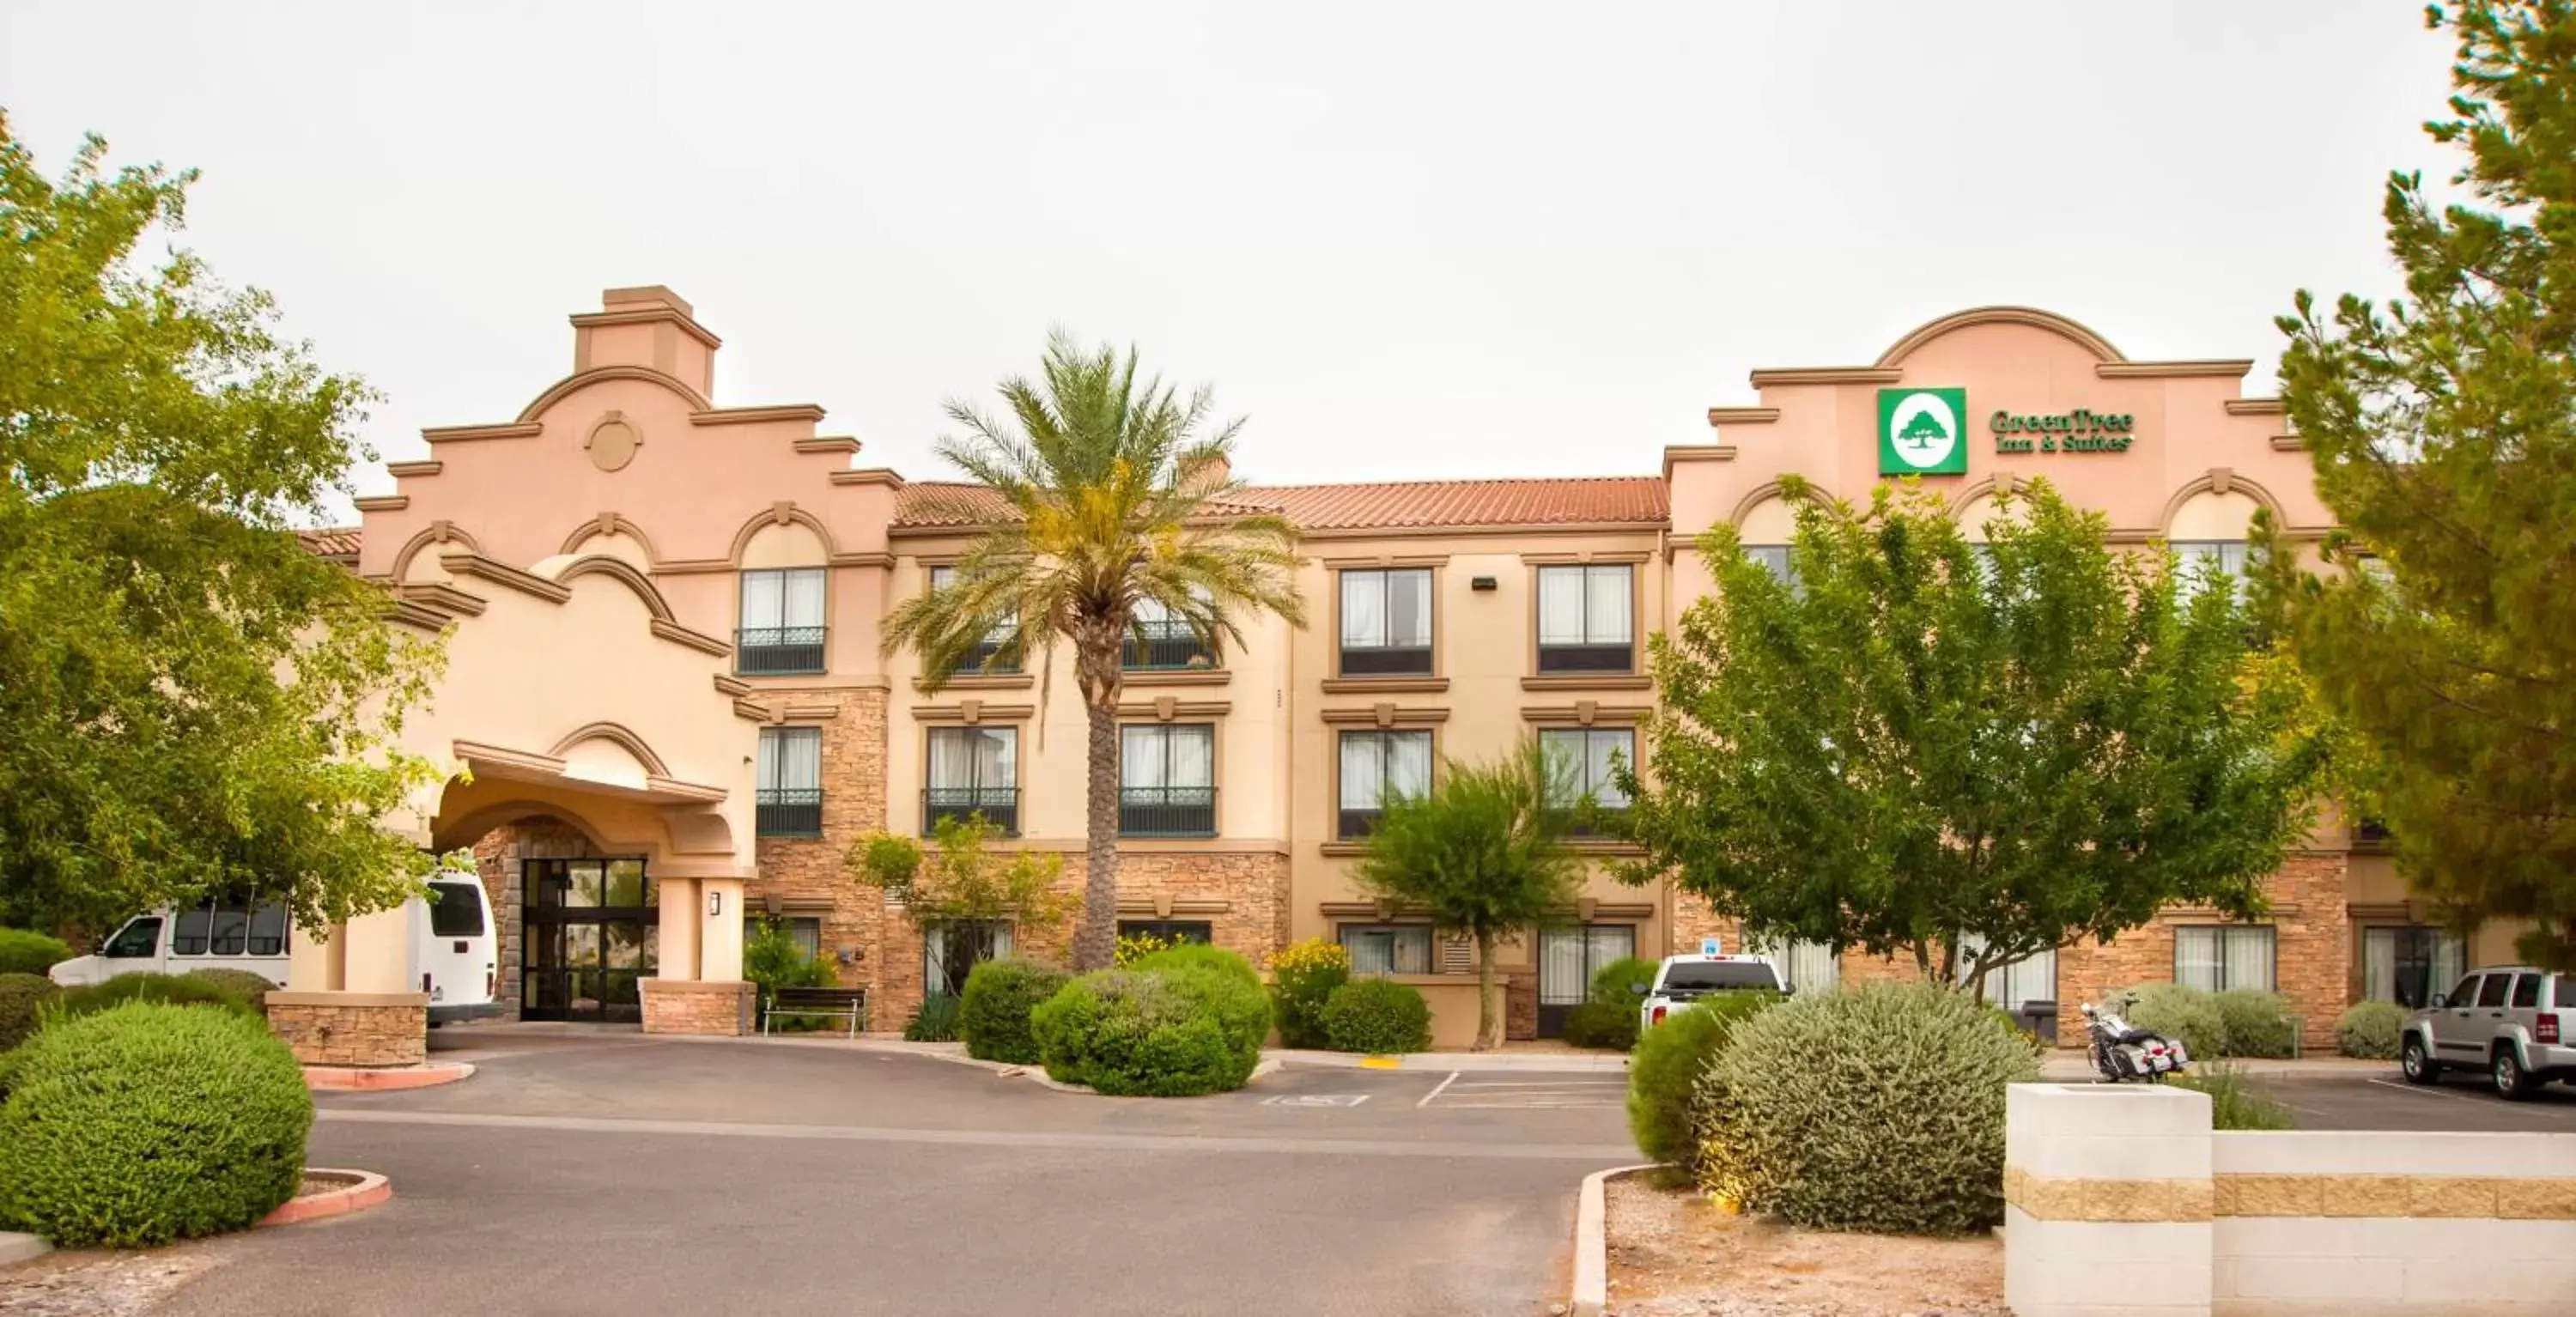 Property Building in GreenTree Inn and Suites Florence, AZ